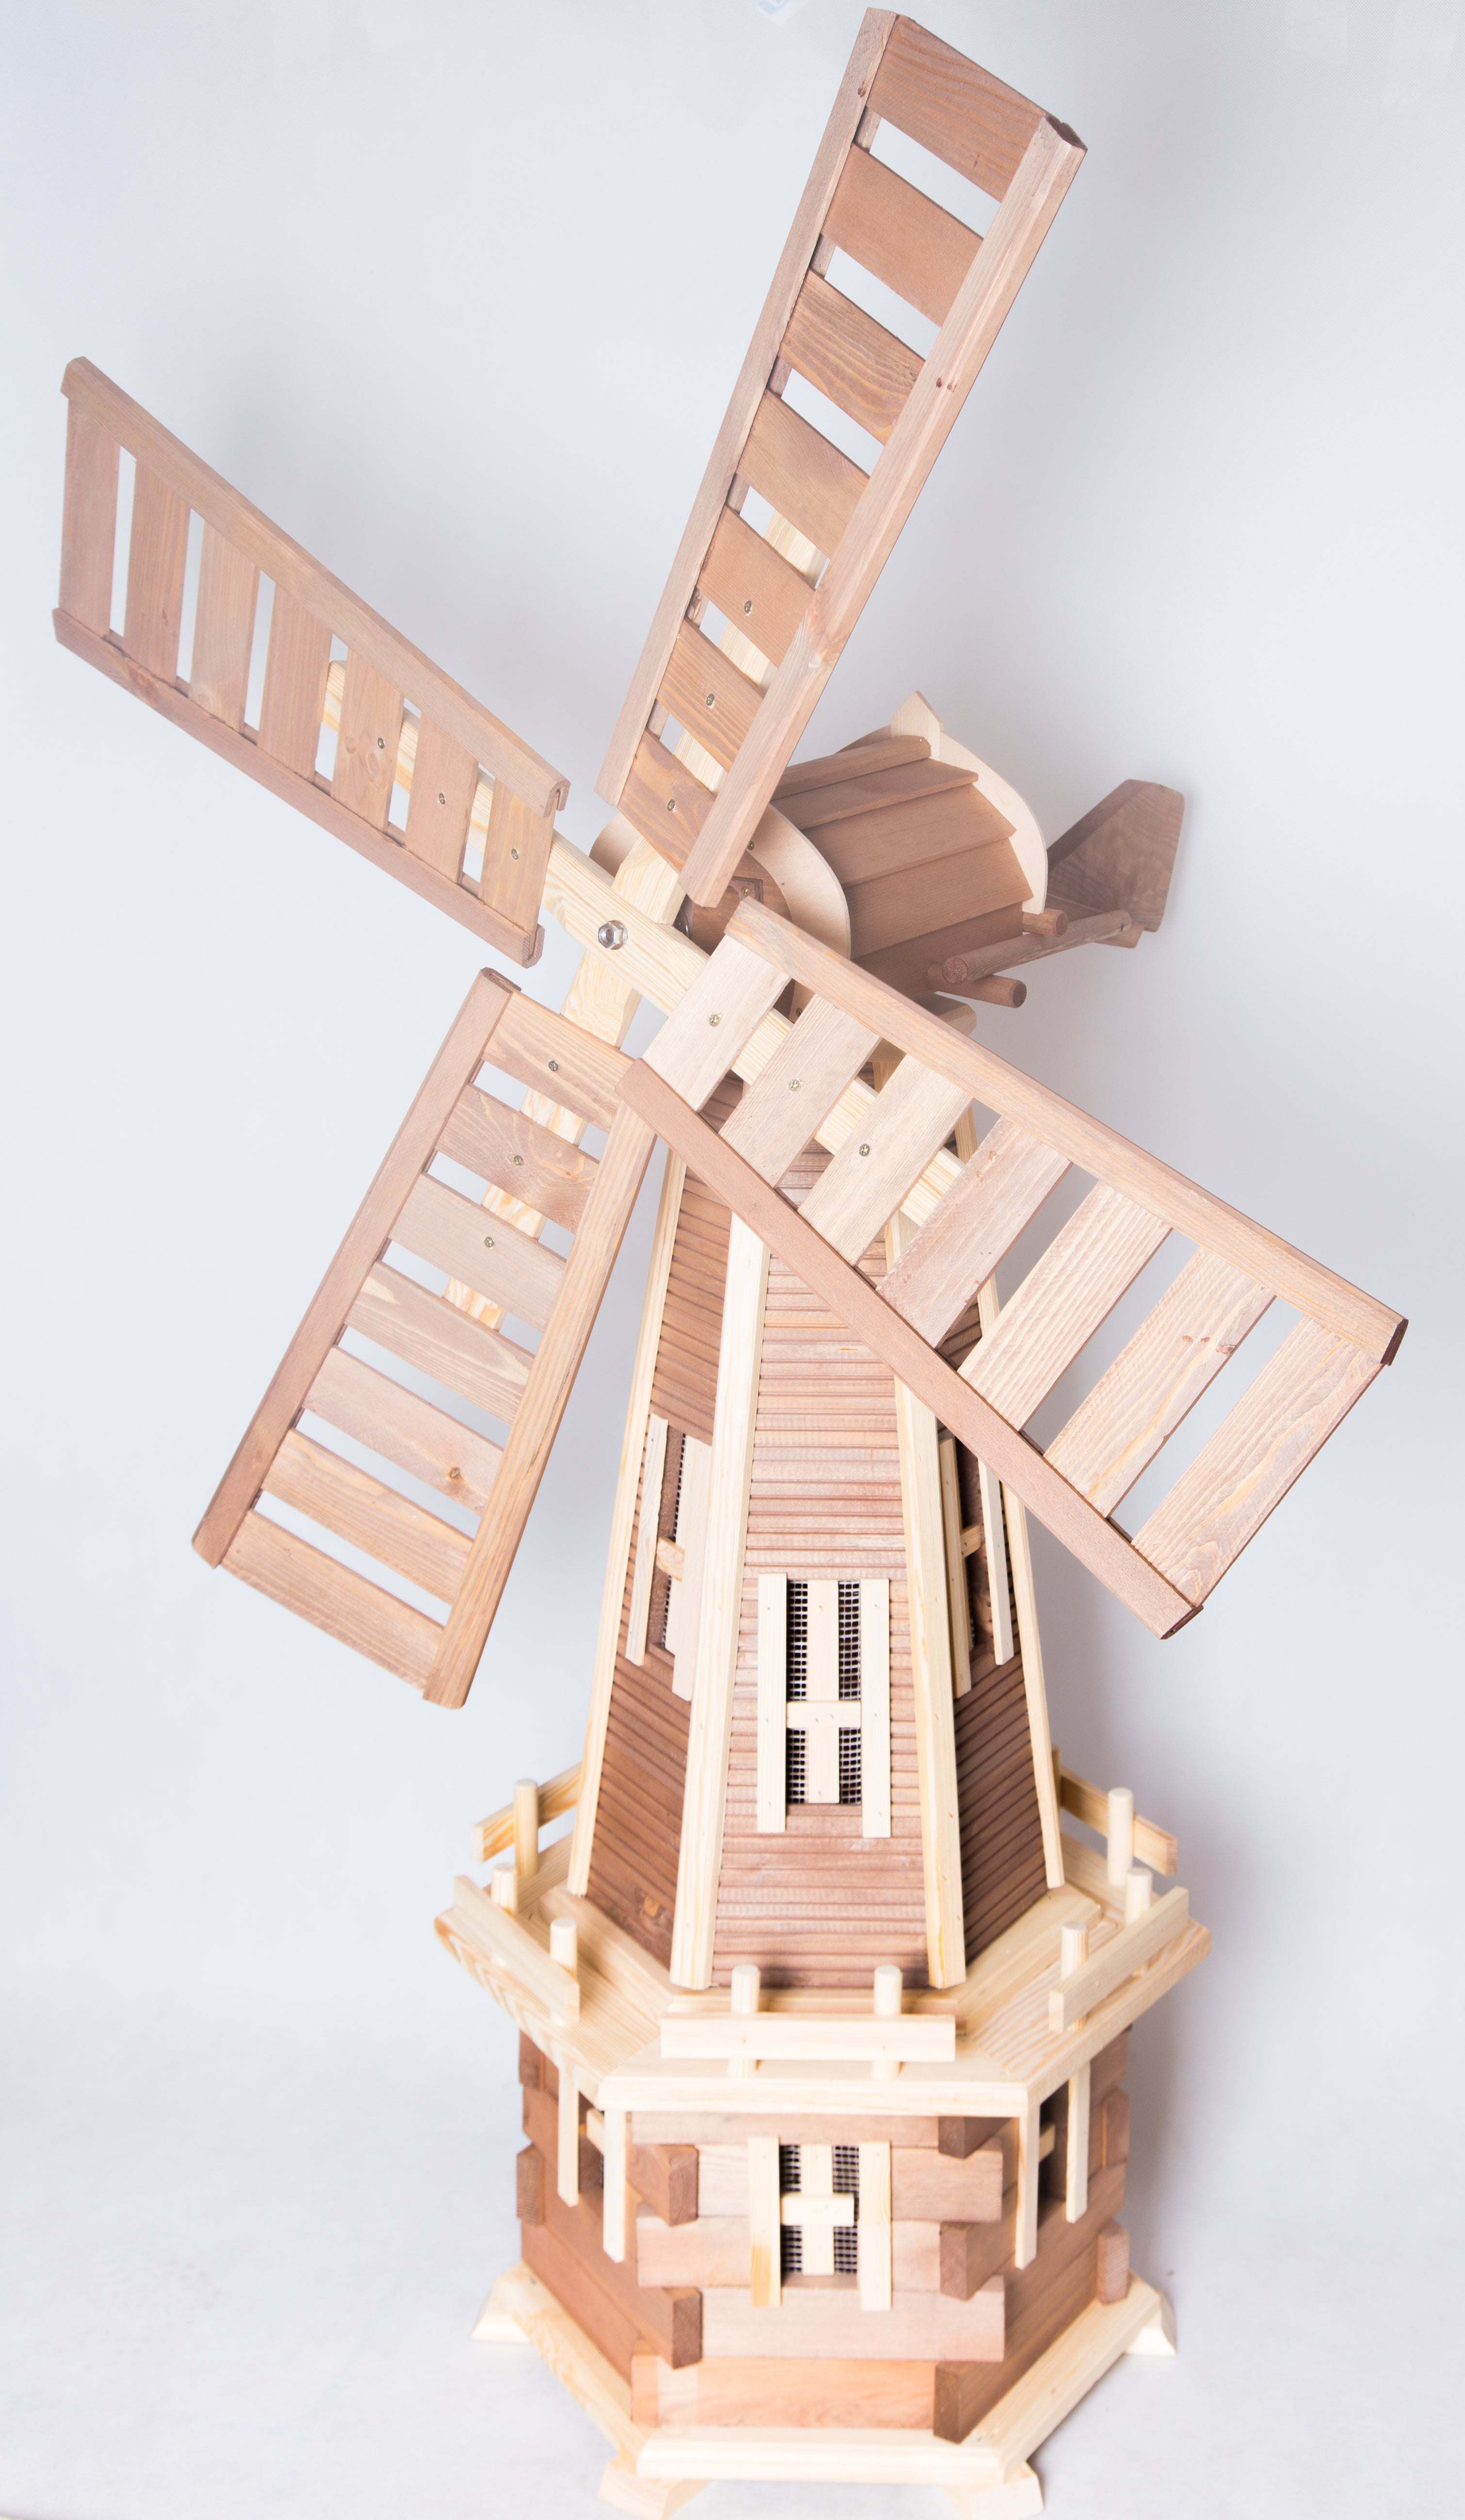 An array of garden windmills in various sizes and designs, enhancing outdoor aesthetics with their spinning blades and artistic appeal from Pendle Windmills